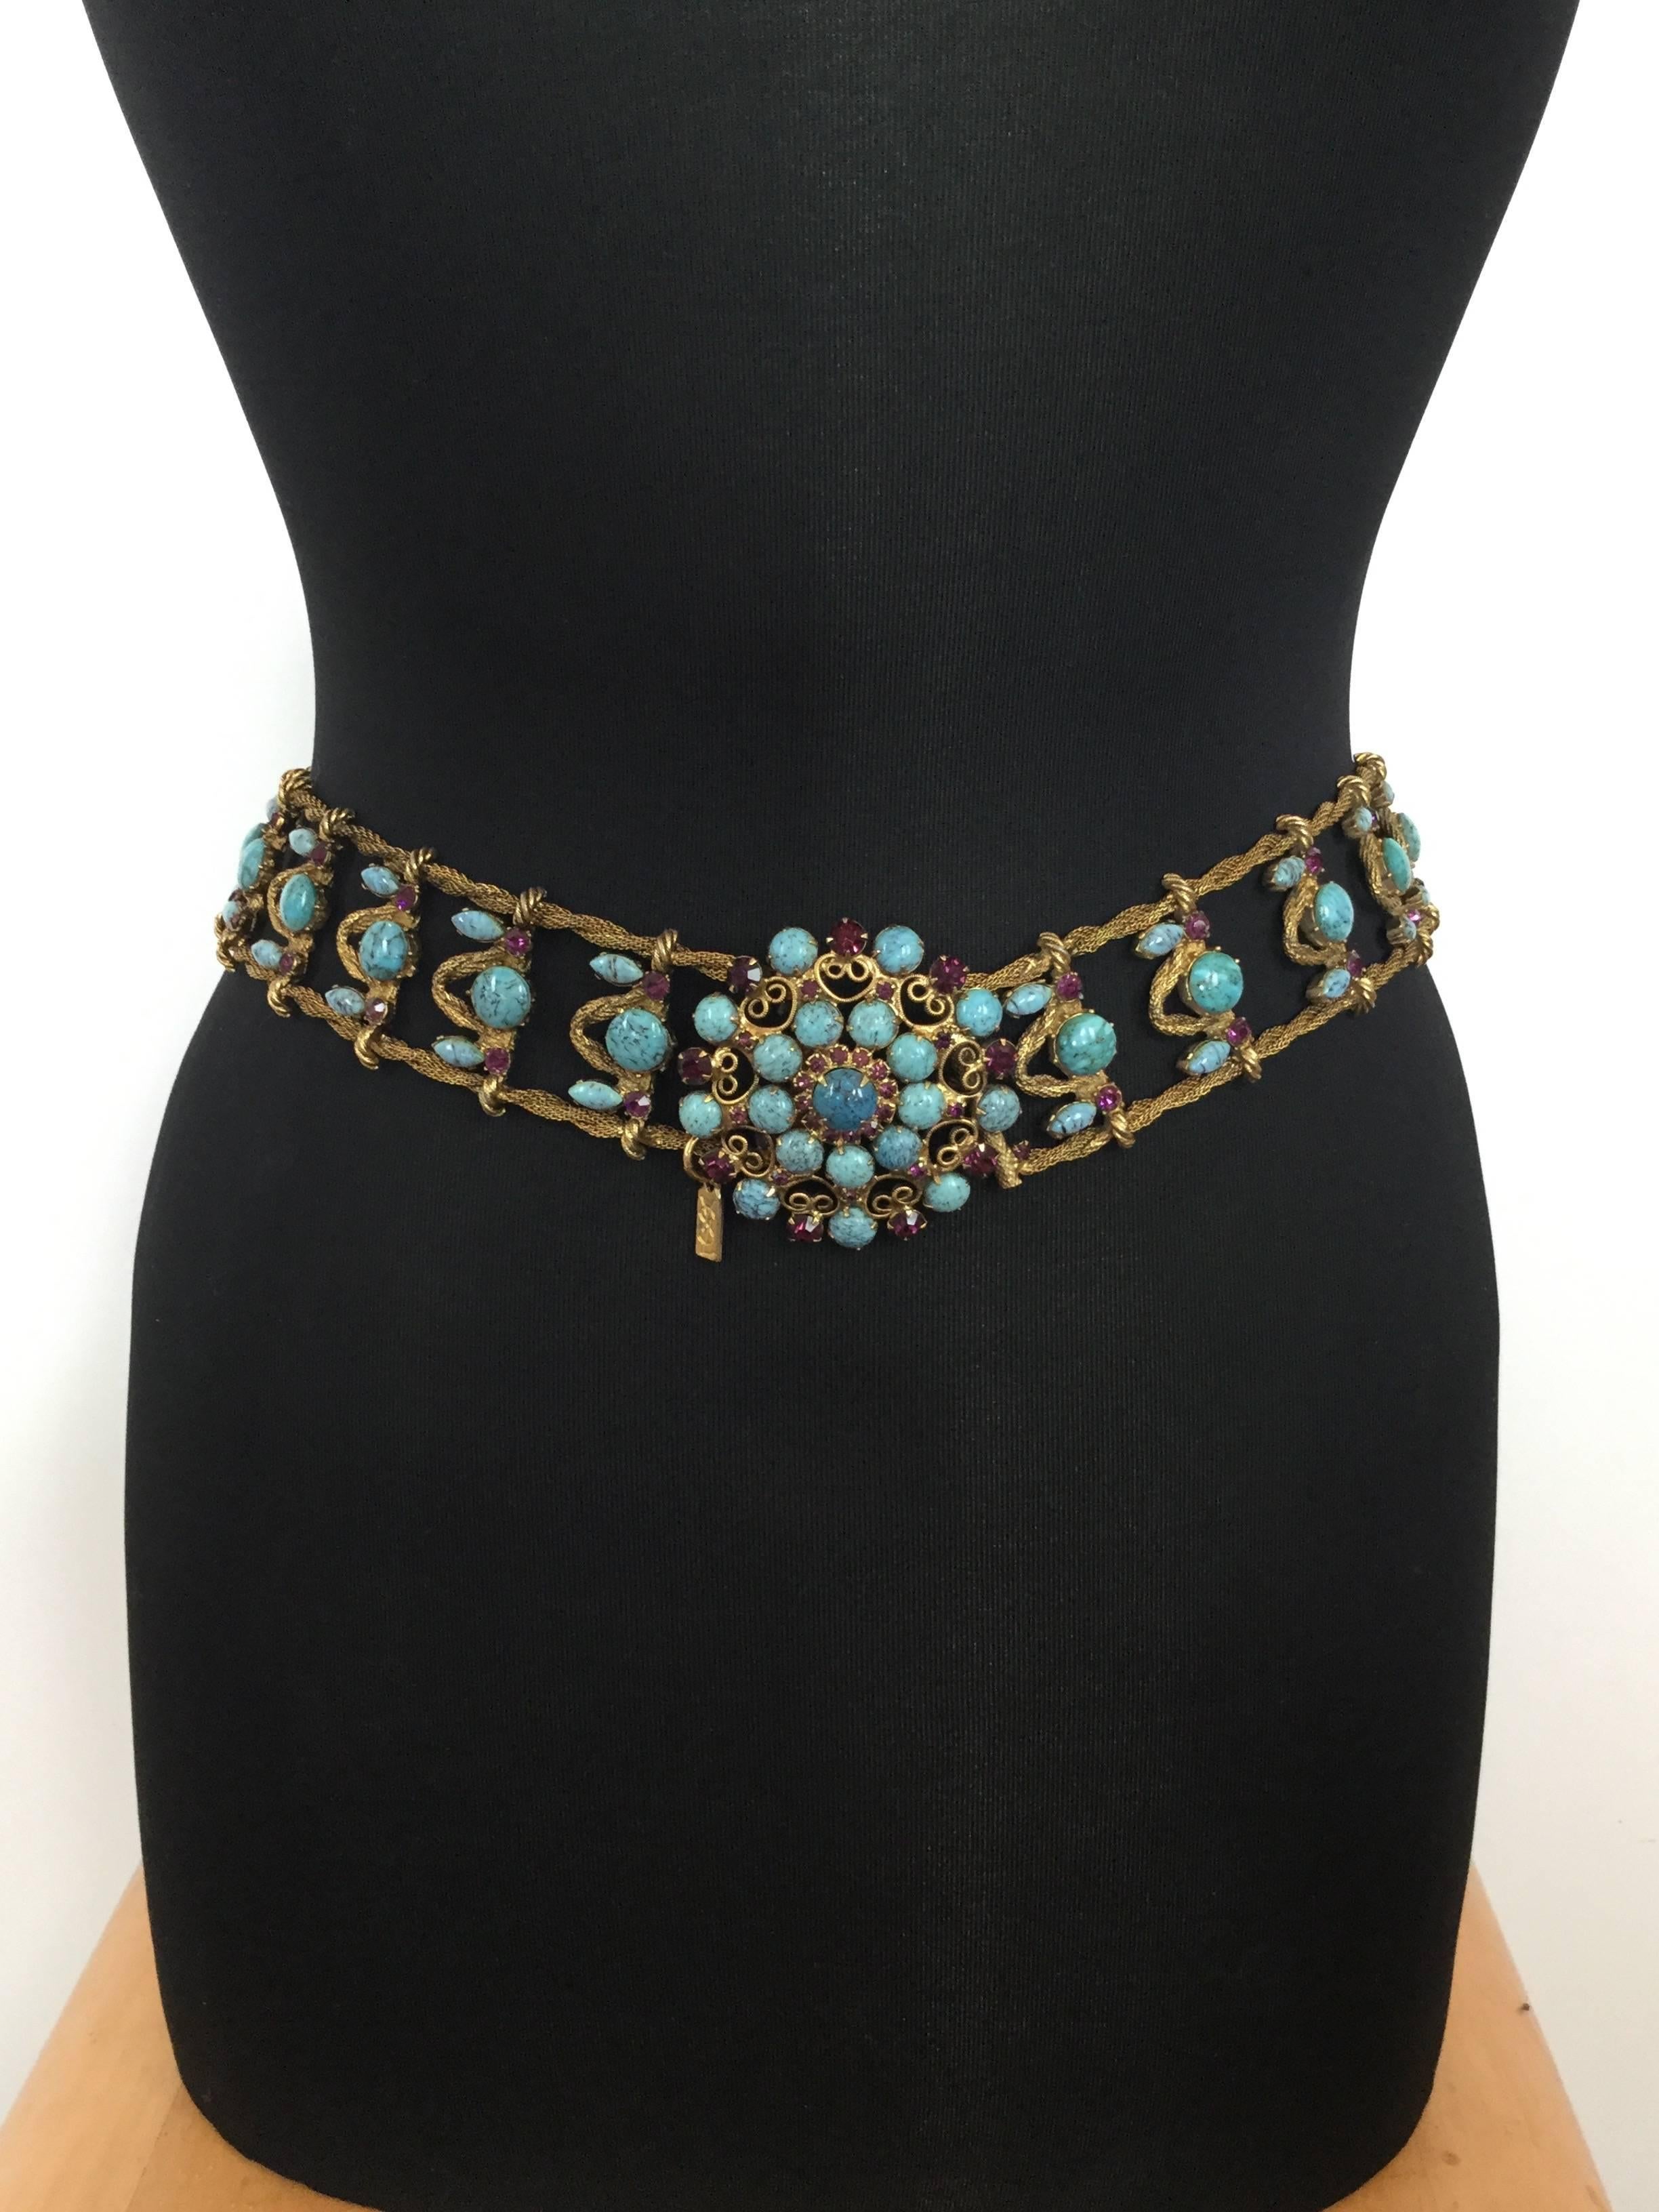 Incredible Yves Saint Laurent Metal Belt with Faux Turquoise Cabochons. 1970's. 3